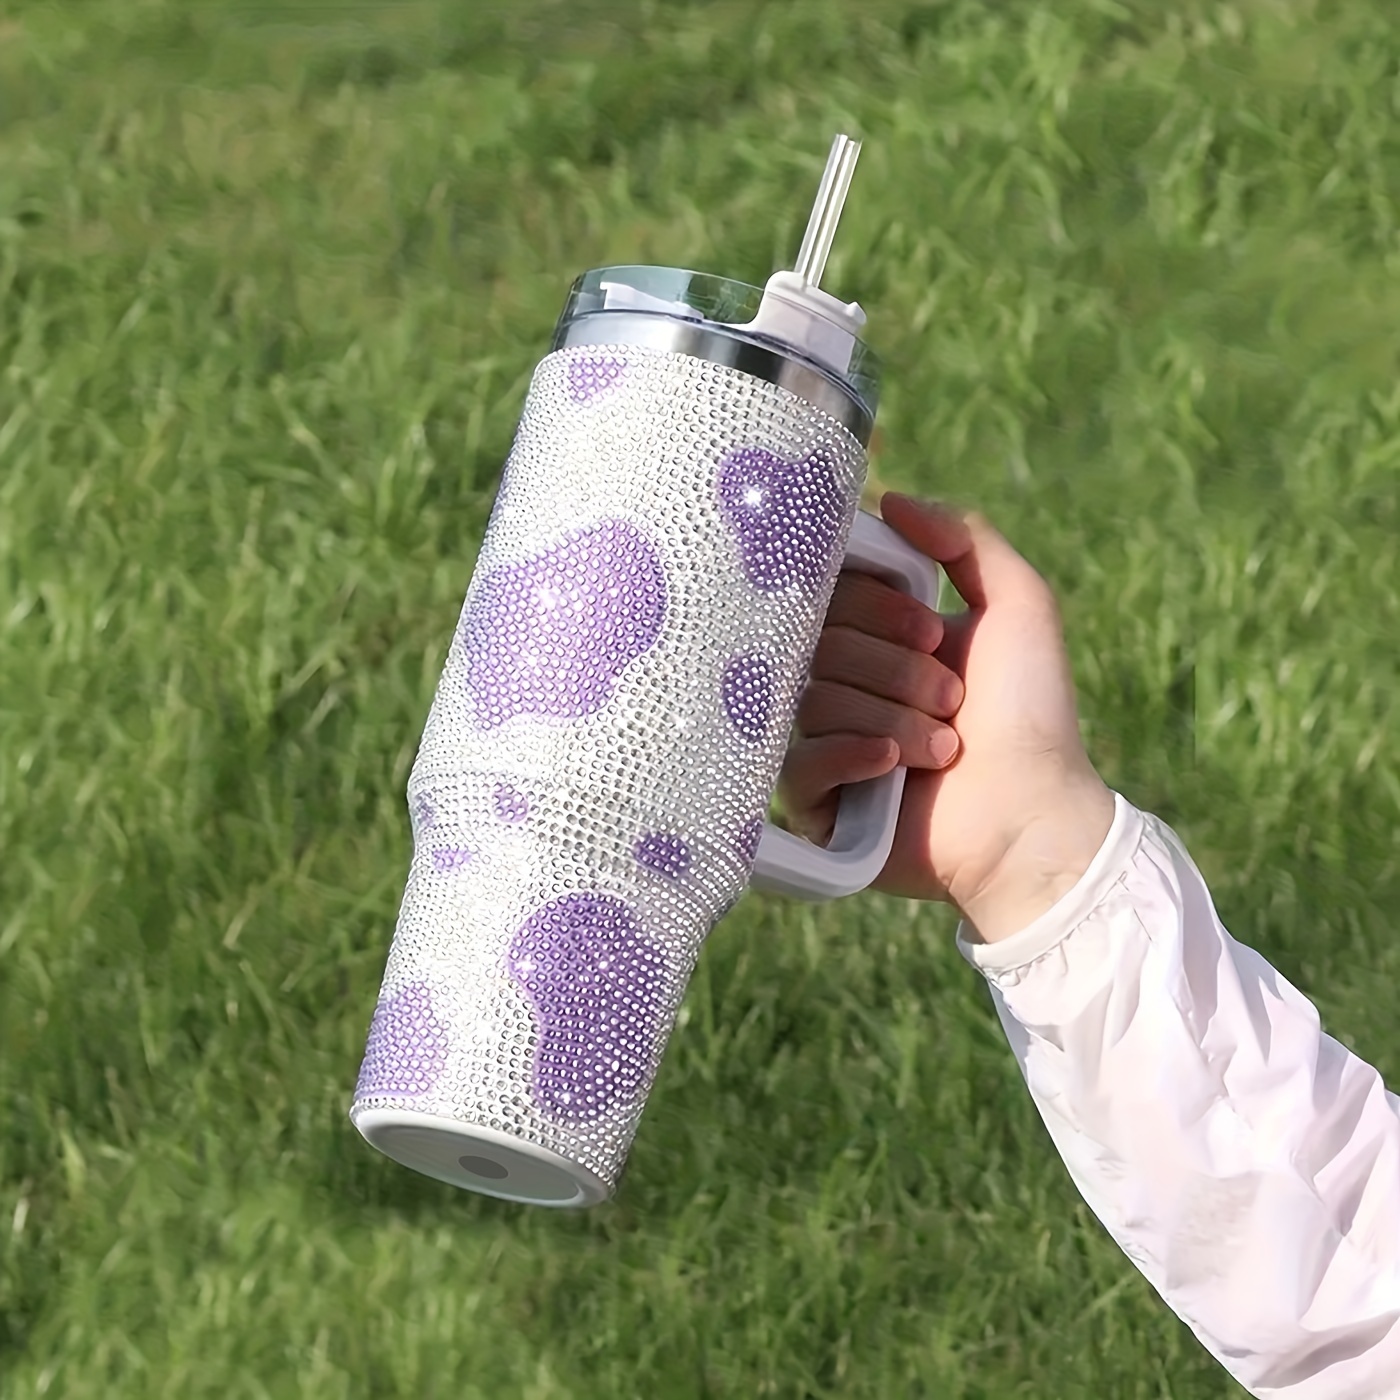 1pc, Cow Print Tumbler With Lid And Straw, 40oz Stainless Steel Thermal  Water Bottle With Handle, Shiny Studded Car Cups, Portable Drinking Cups,  For Car, Home, Office, Summer Drinkware, Travel Accessories, Birthday